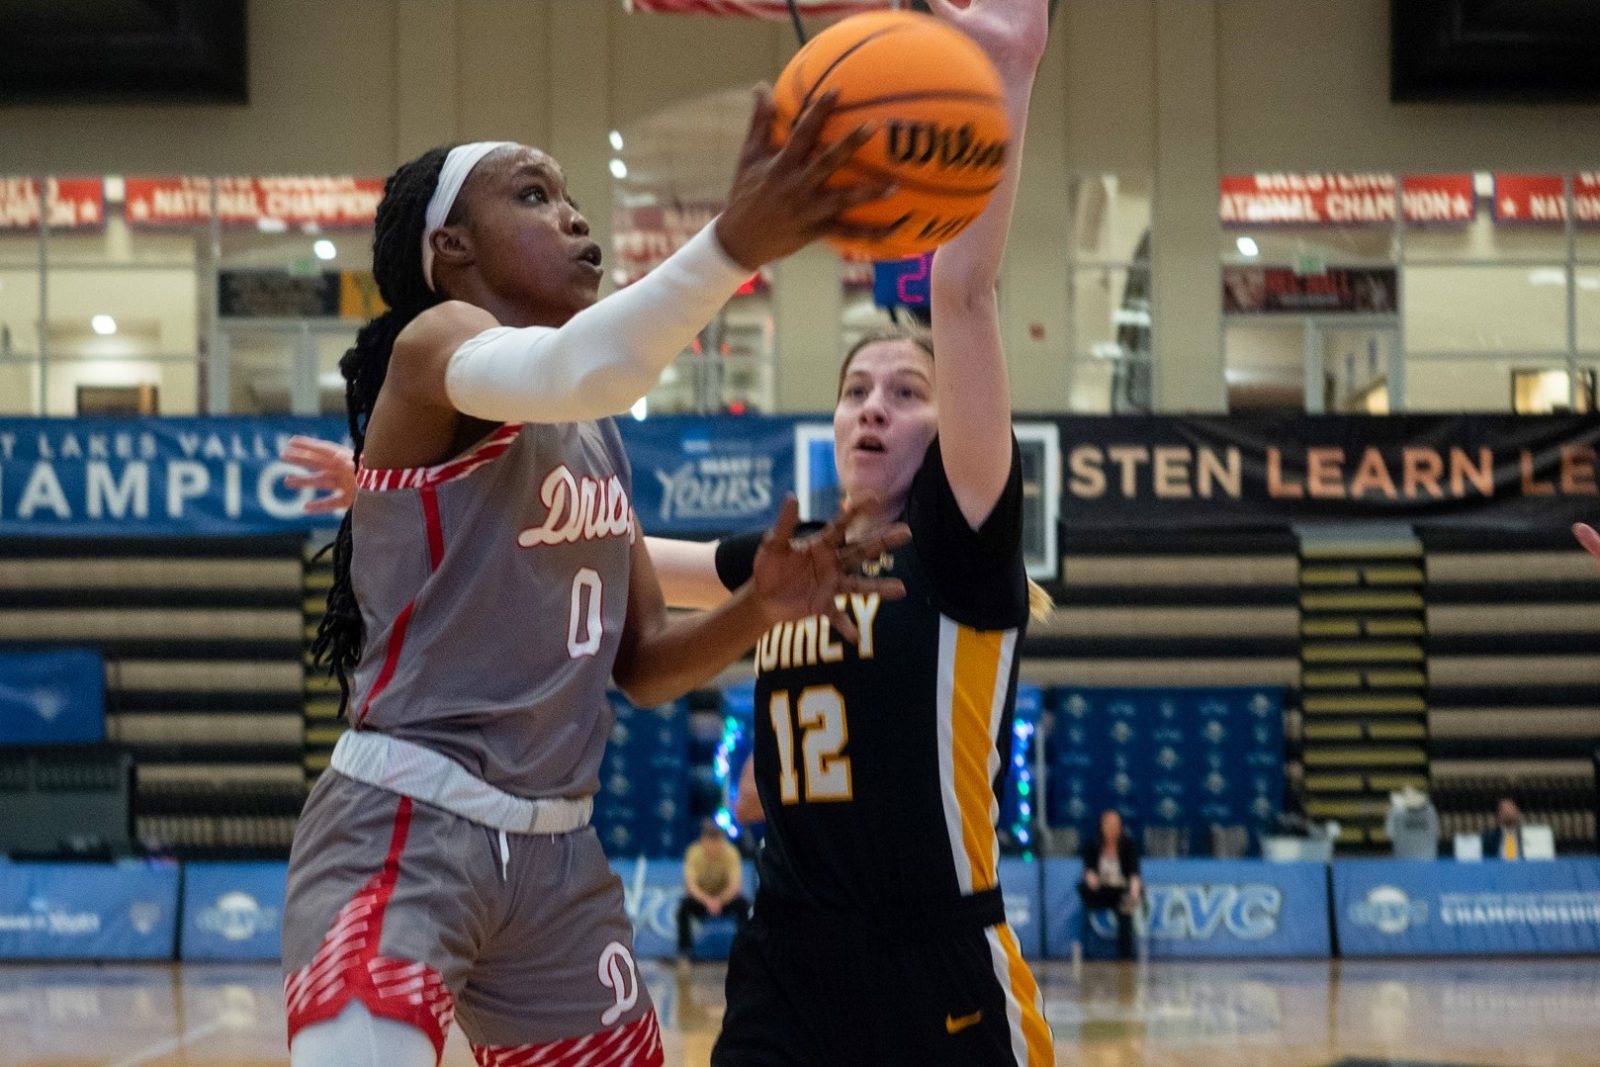 A basketball player shoots a layup as an opponent guards her